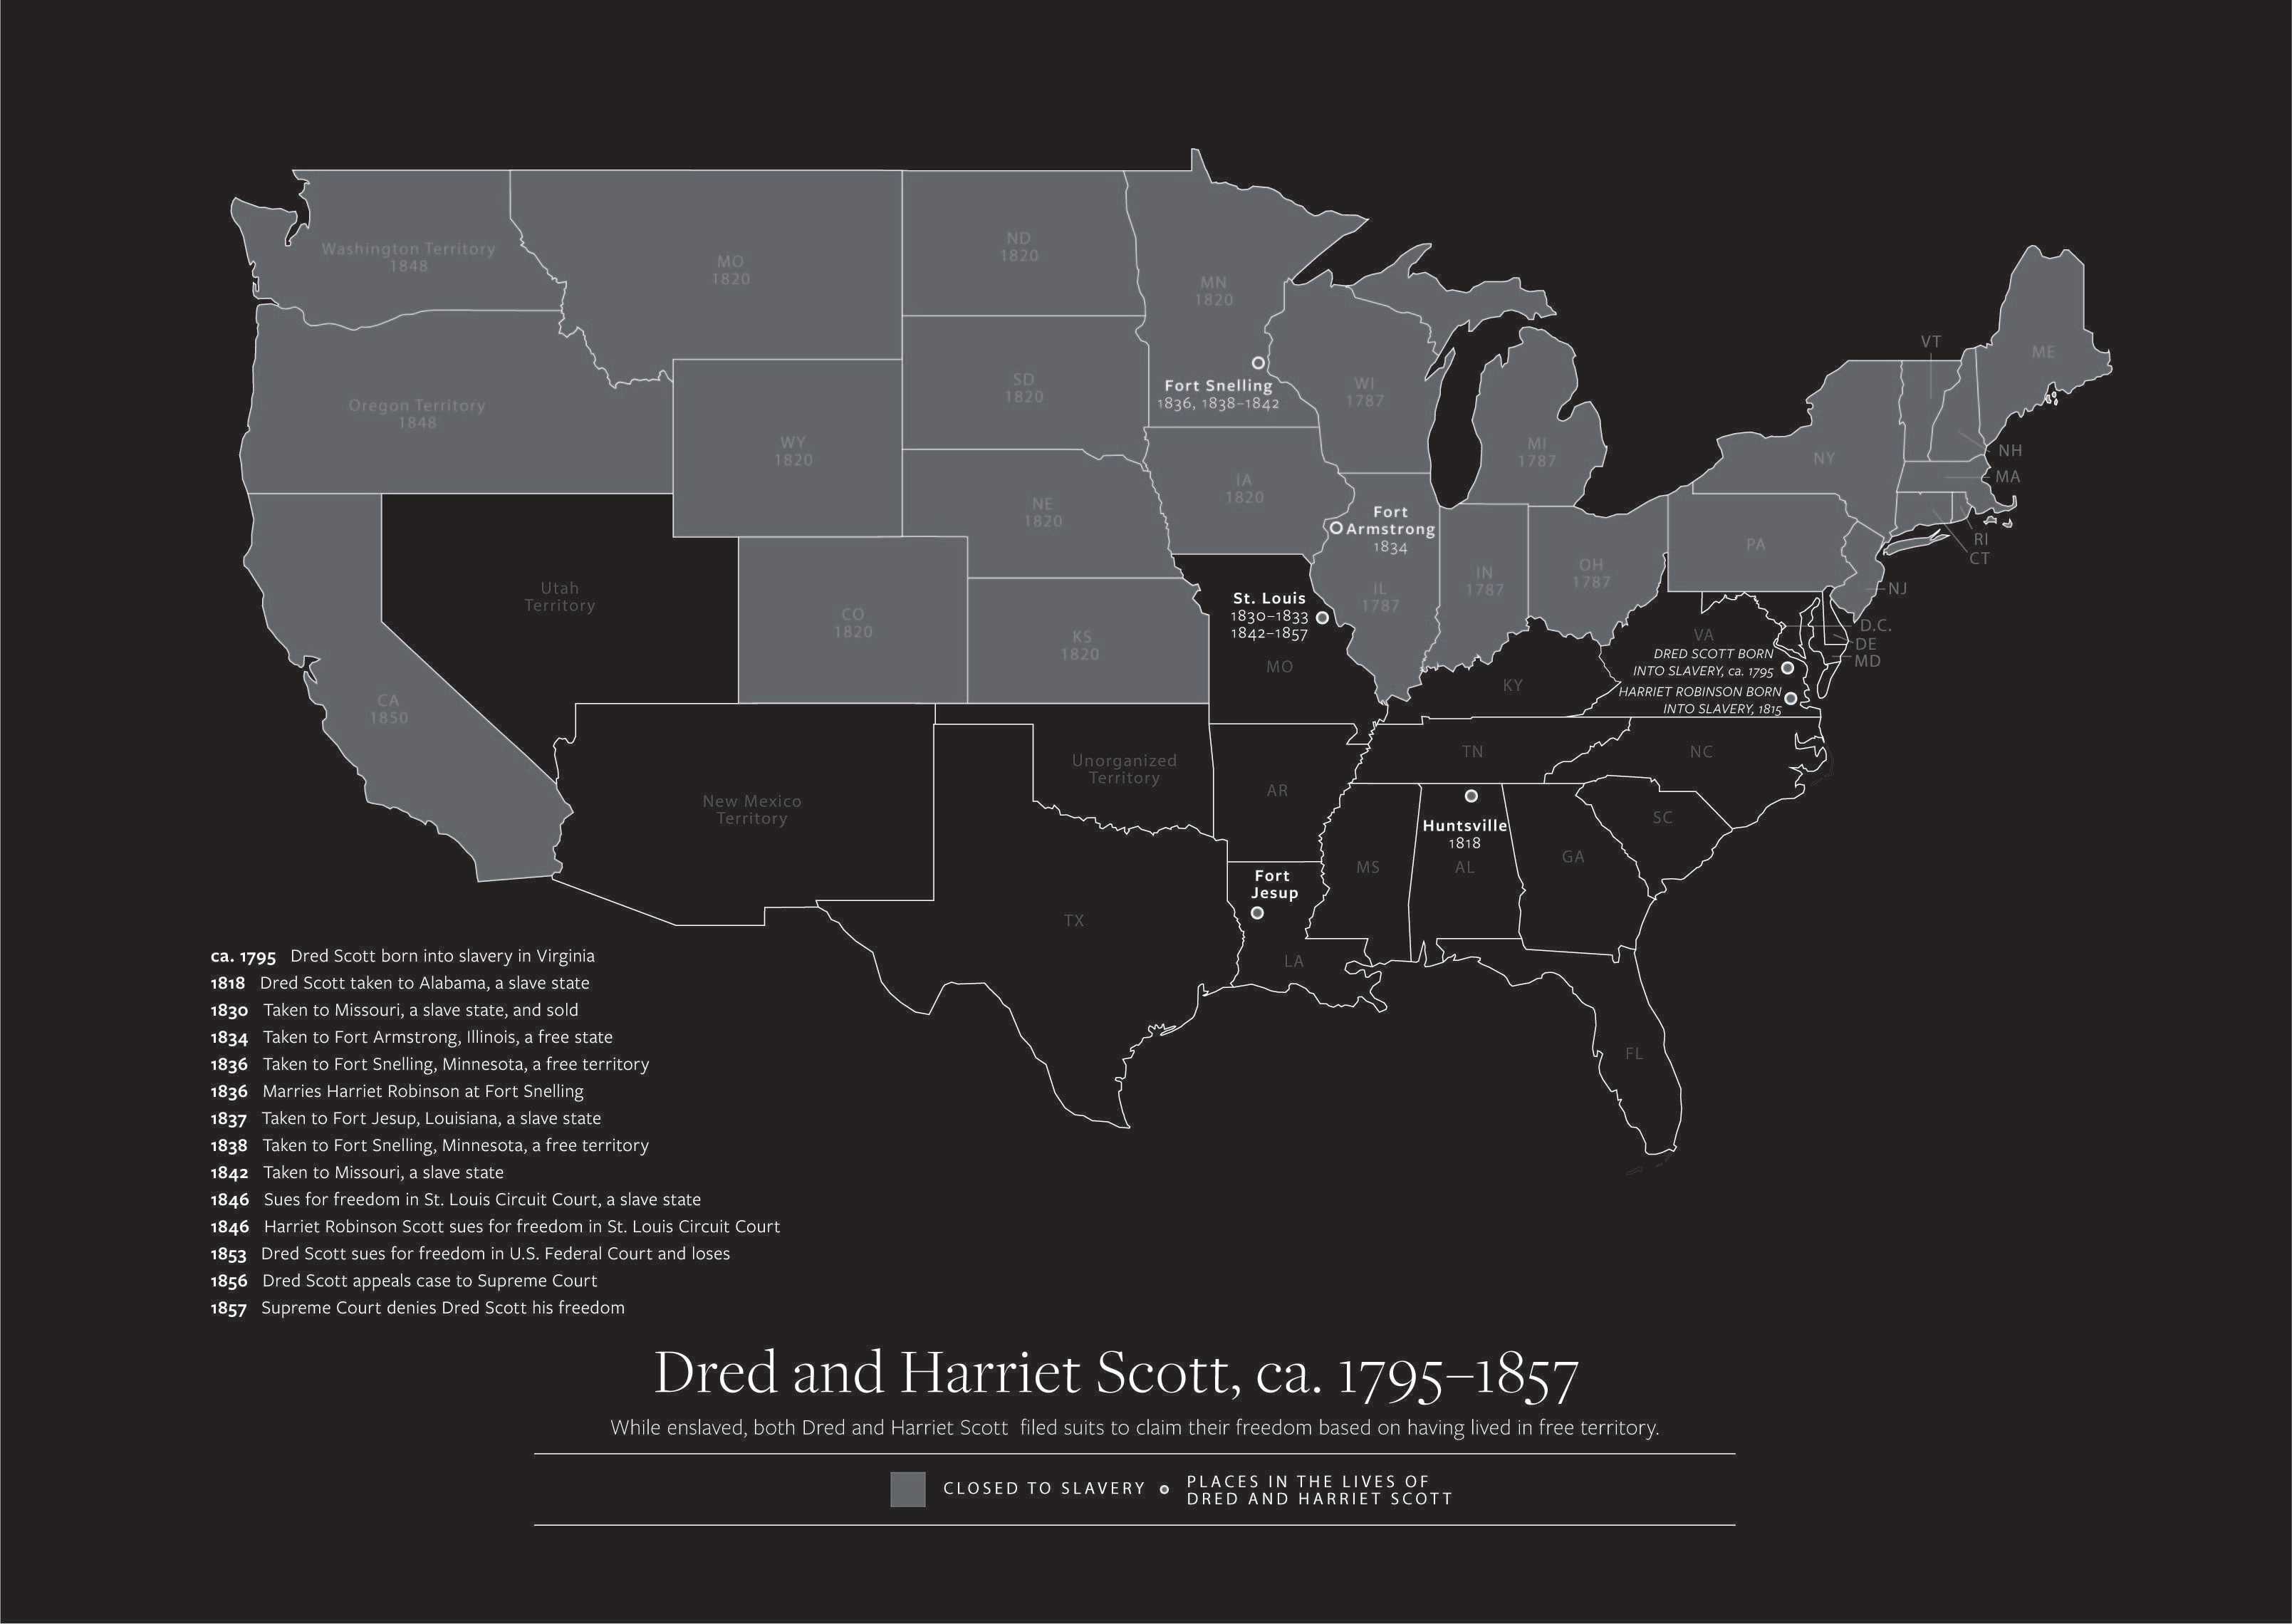 Map of the nation showing where Dred and Harriet Scott filed suits for freedom